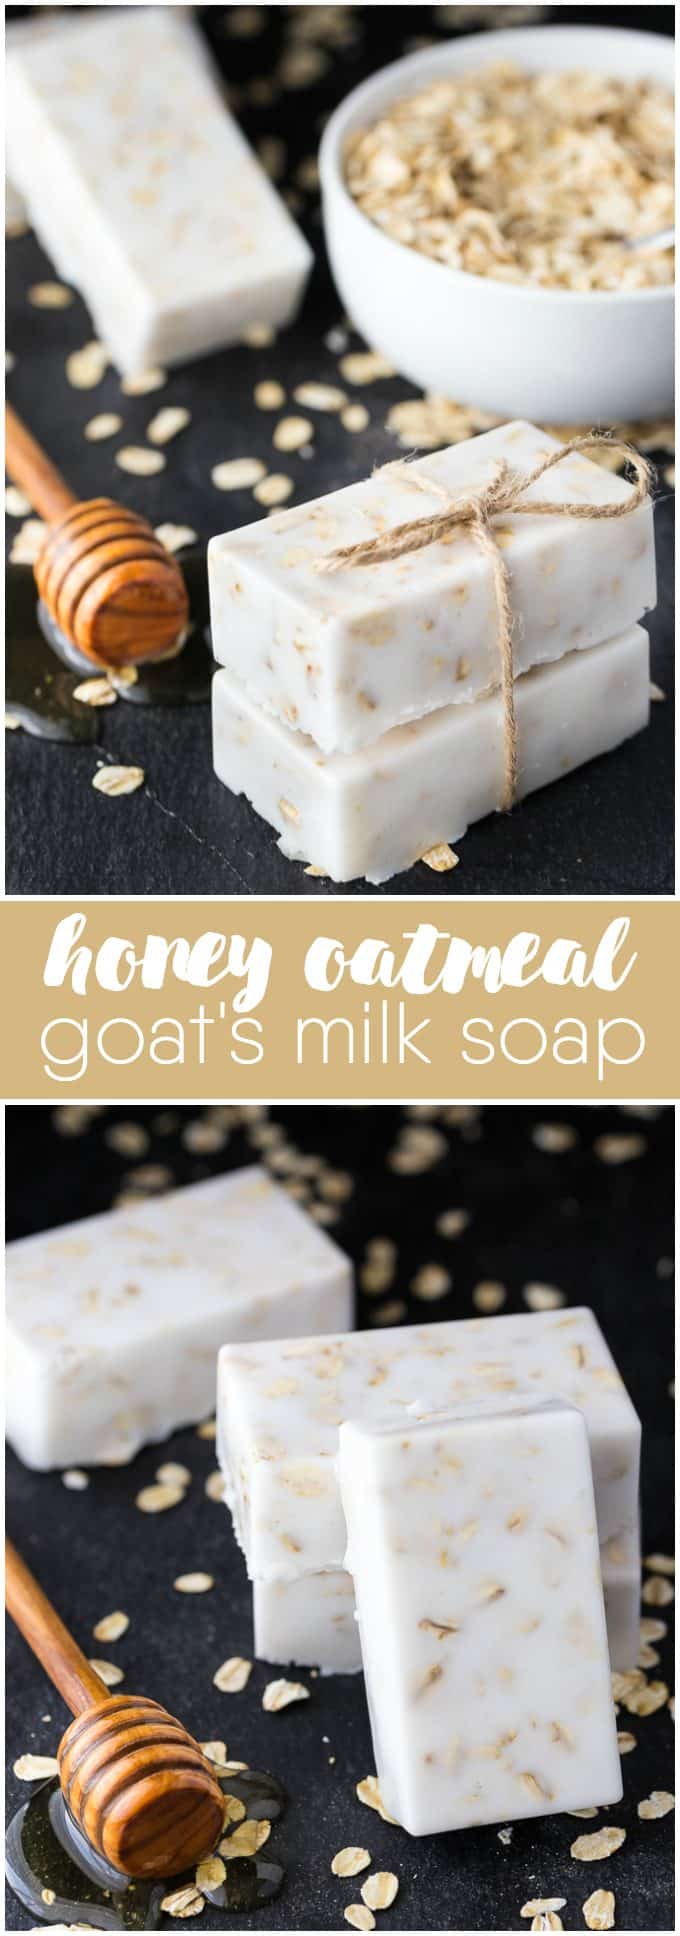 Honey Oatmeal Goat's Milk Soap - Your skin will feel amazing after washing with this simple DIY soap. Honey and oats are the perfect combination to combat dry, sensitive skin. 